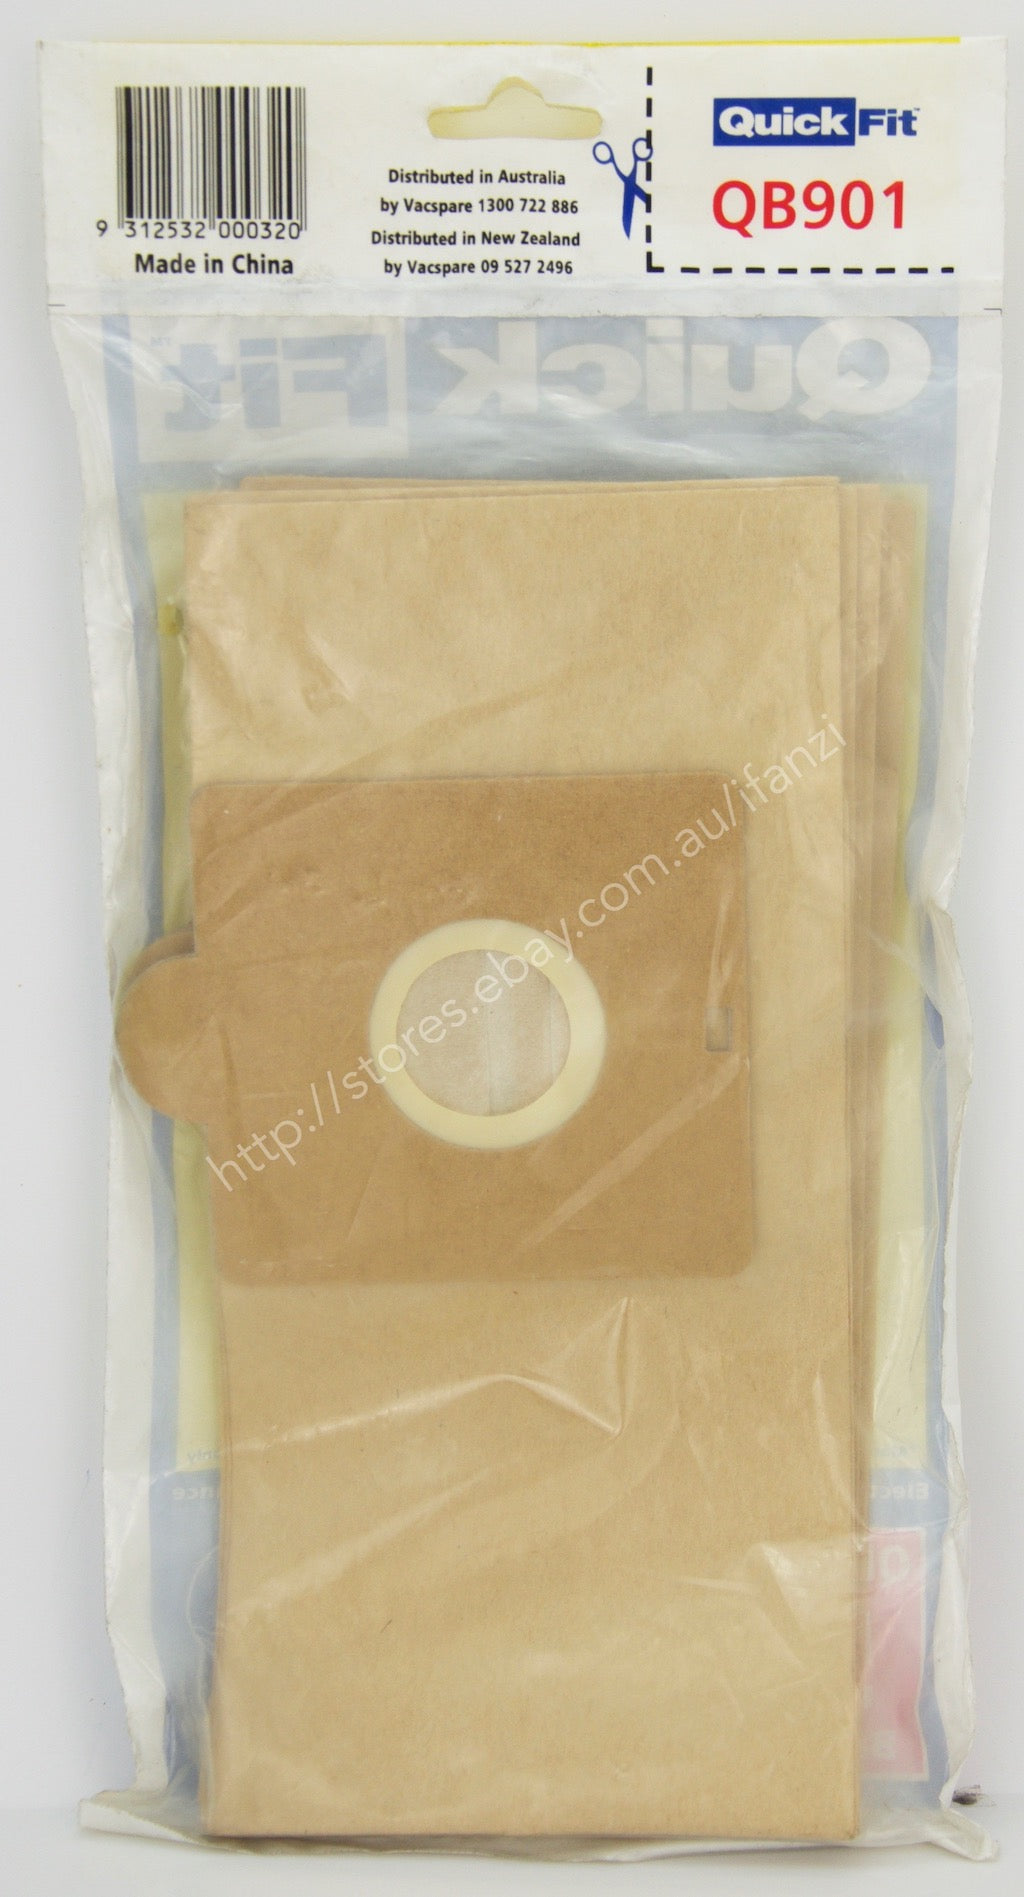 QuickFit Vacuum Cleaner Bags For Volta 5 Bags Included QB901